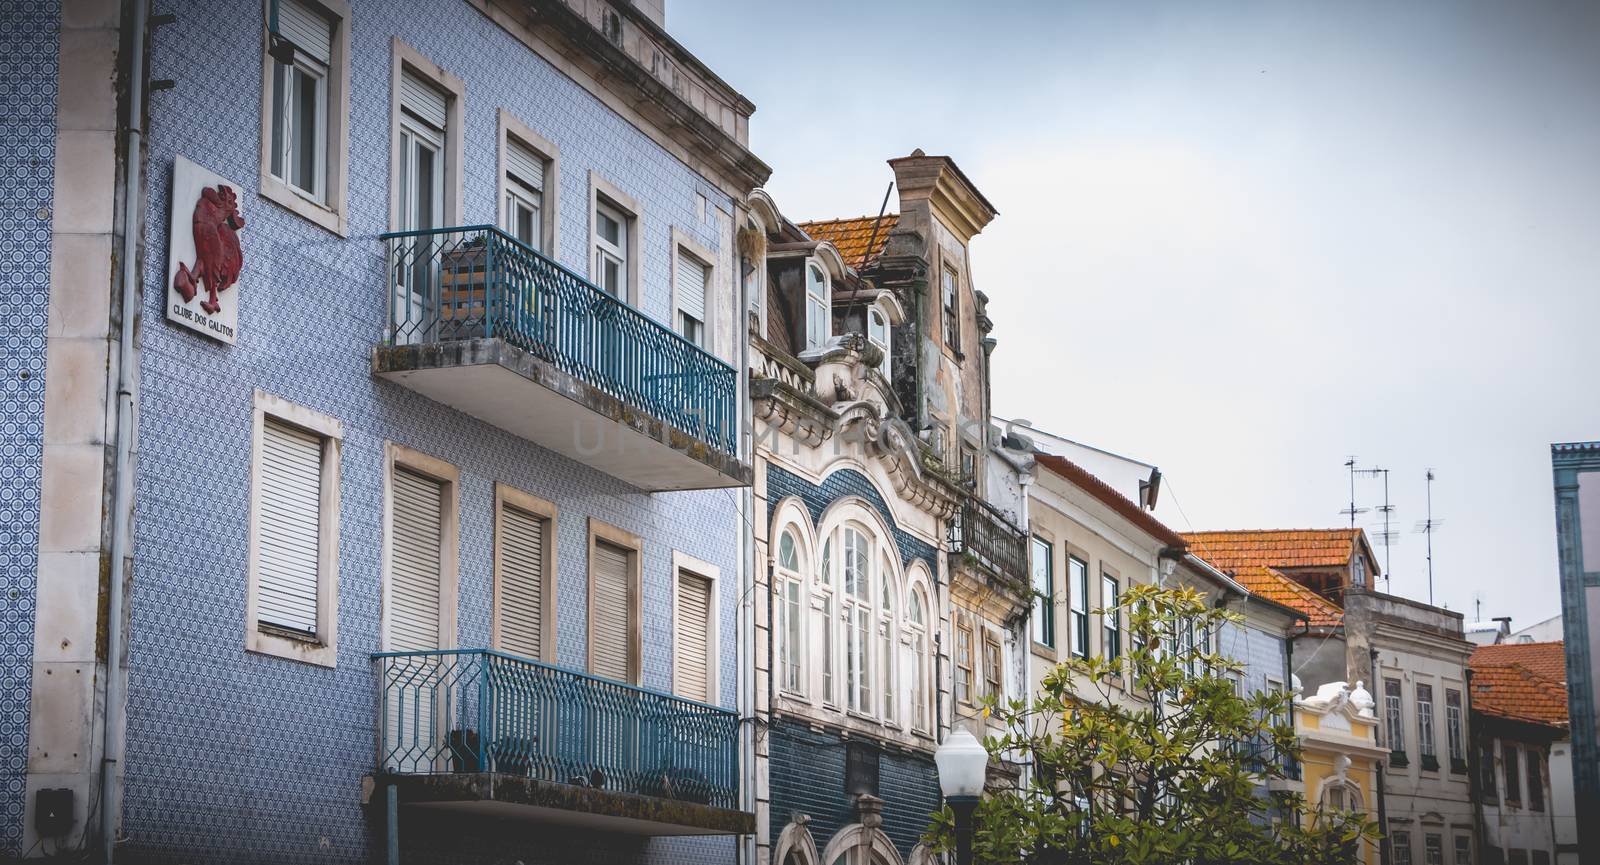 Typical house architecture detail in aveiro, portugal by AtlanticEUROSTOXX